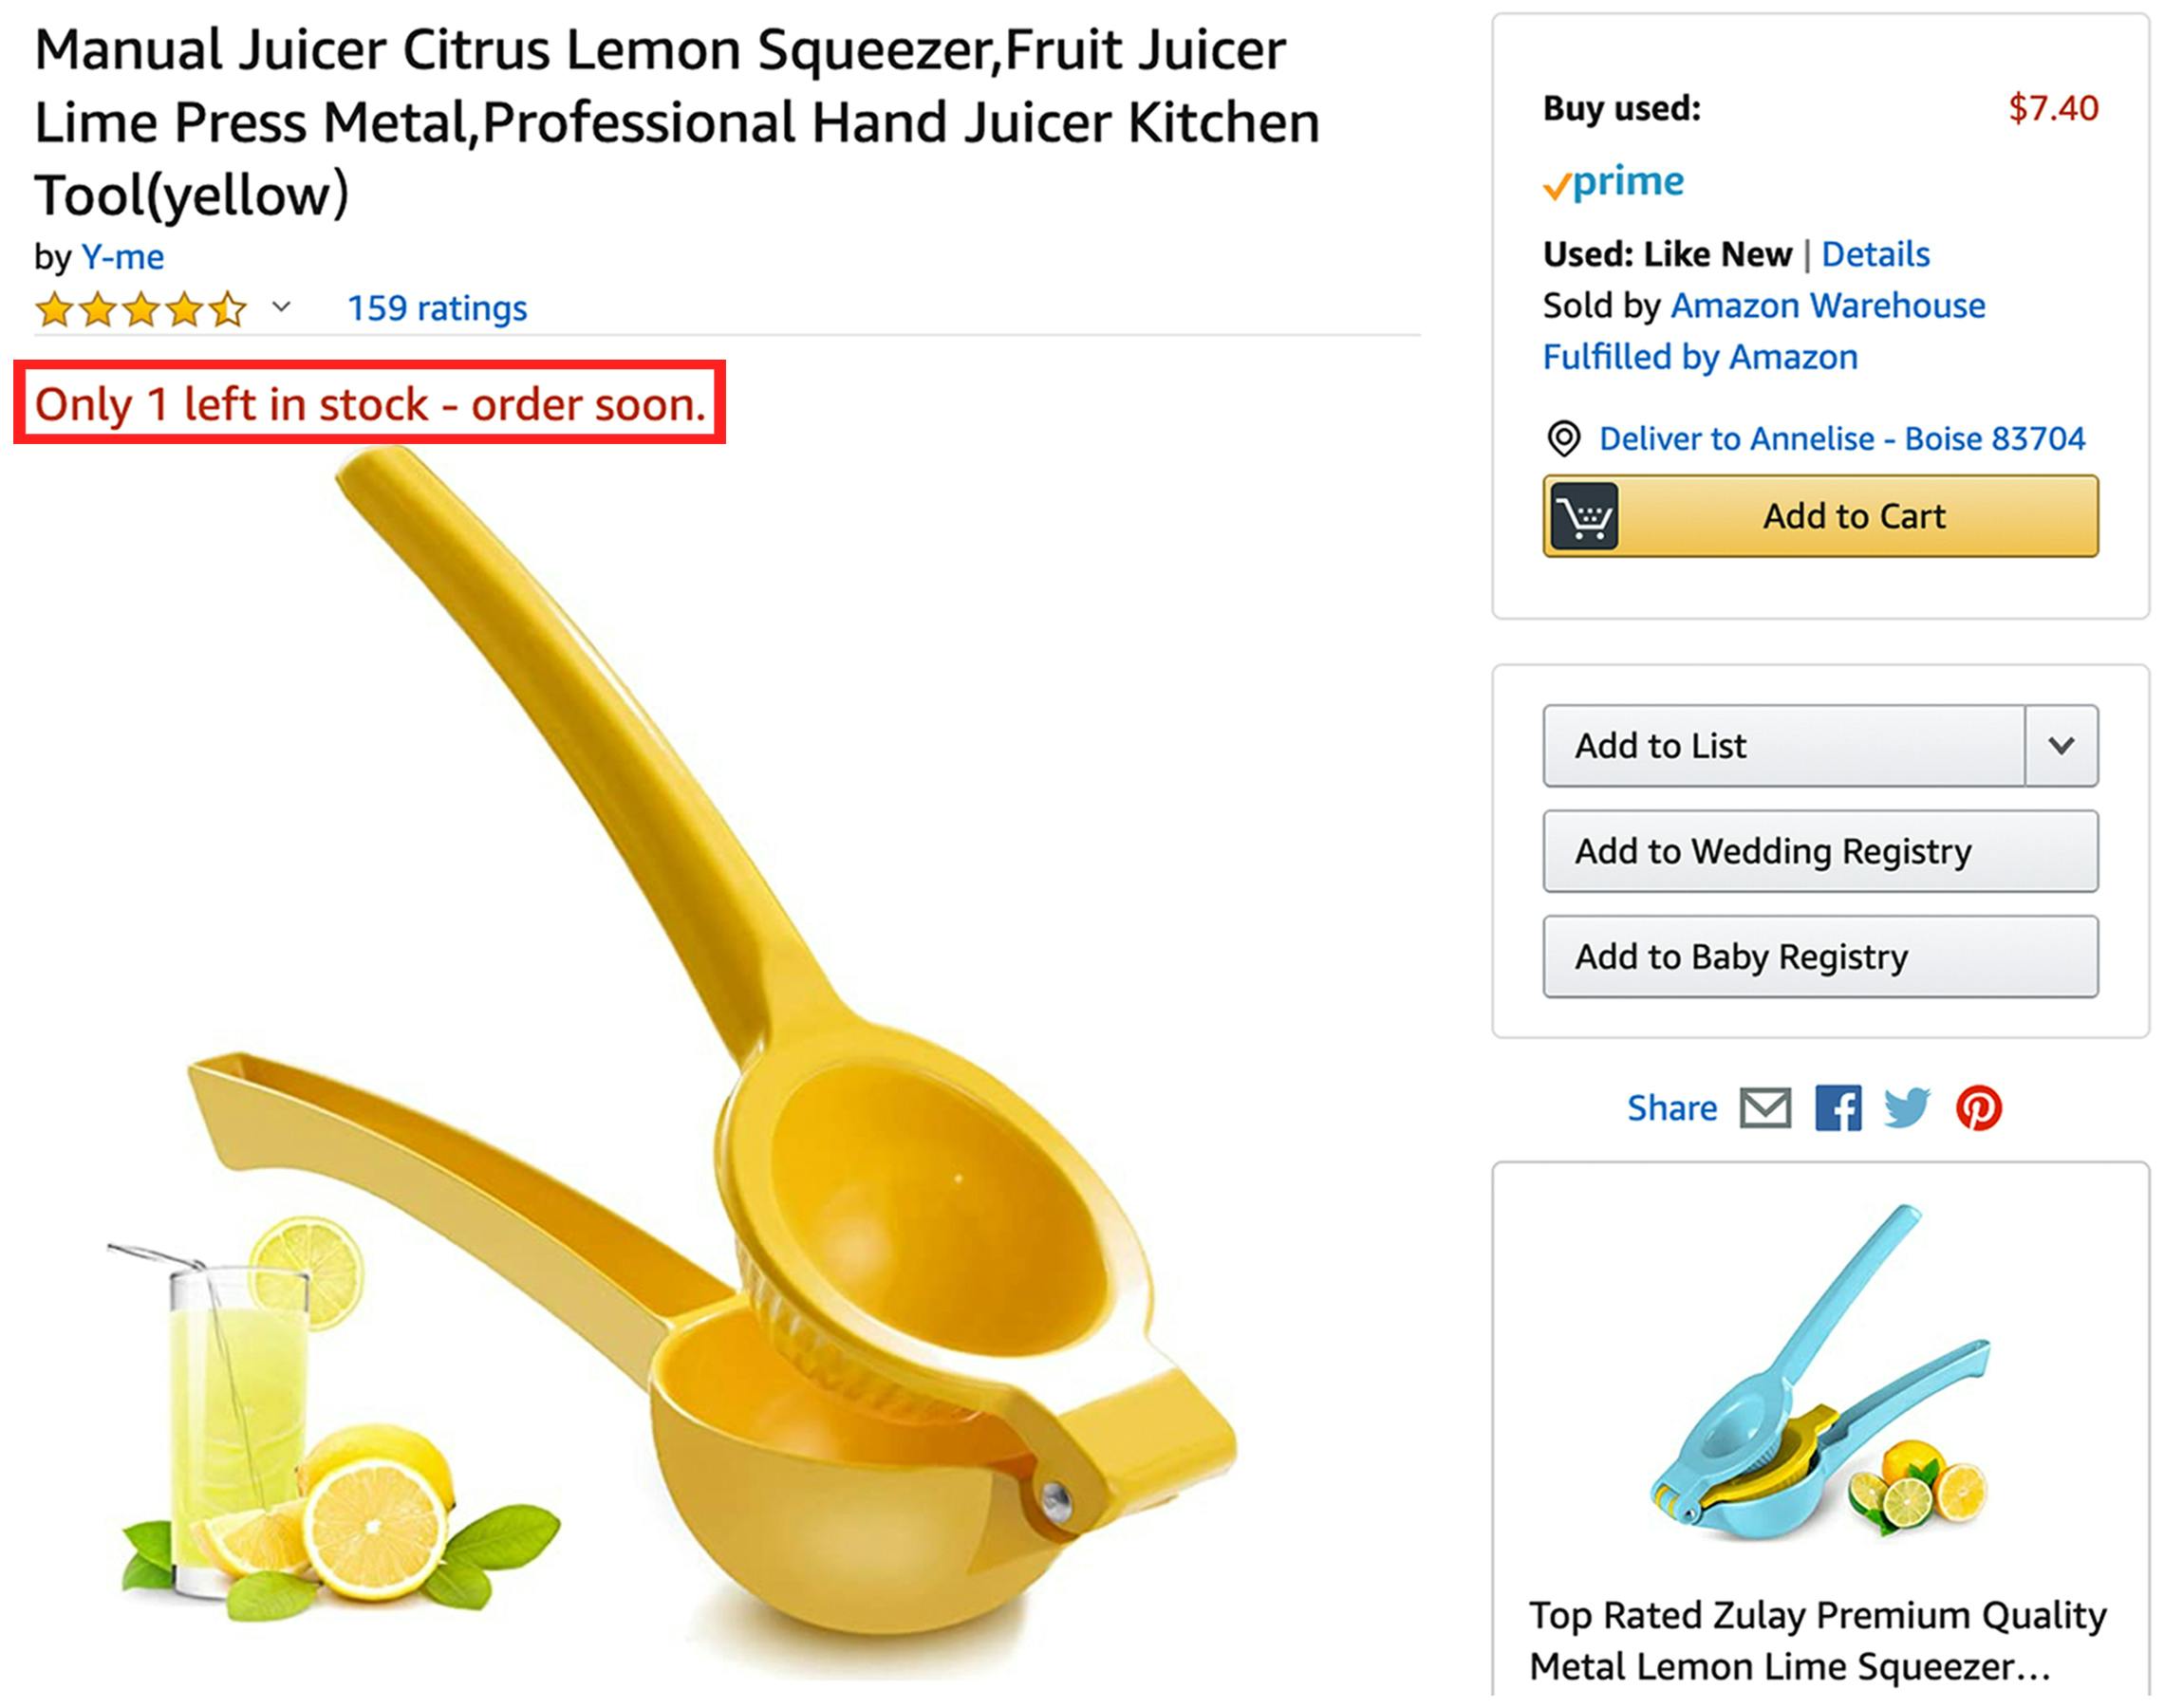 Screenshot of a manual juicer sold on Amazon Warehouse with a red box around the line reading "Only 1 left in stock - order soon